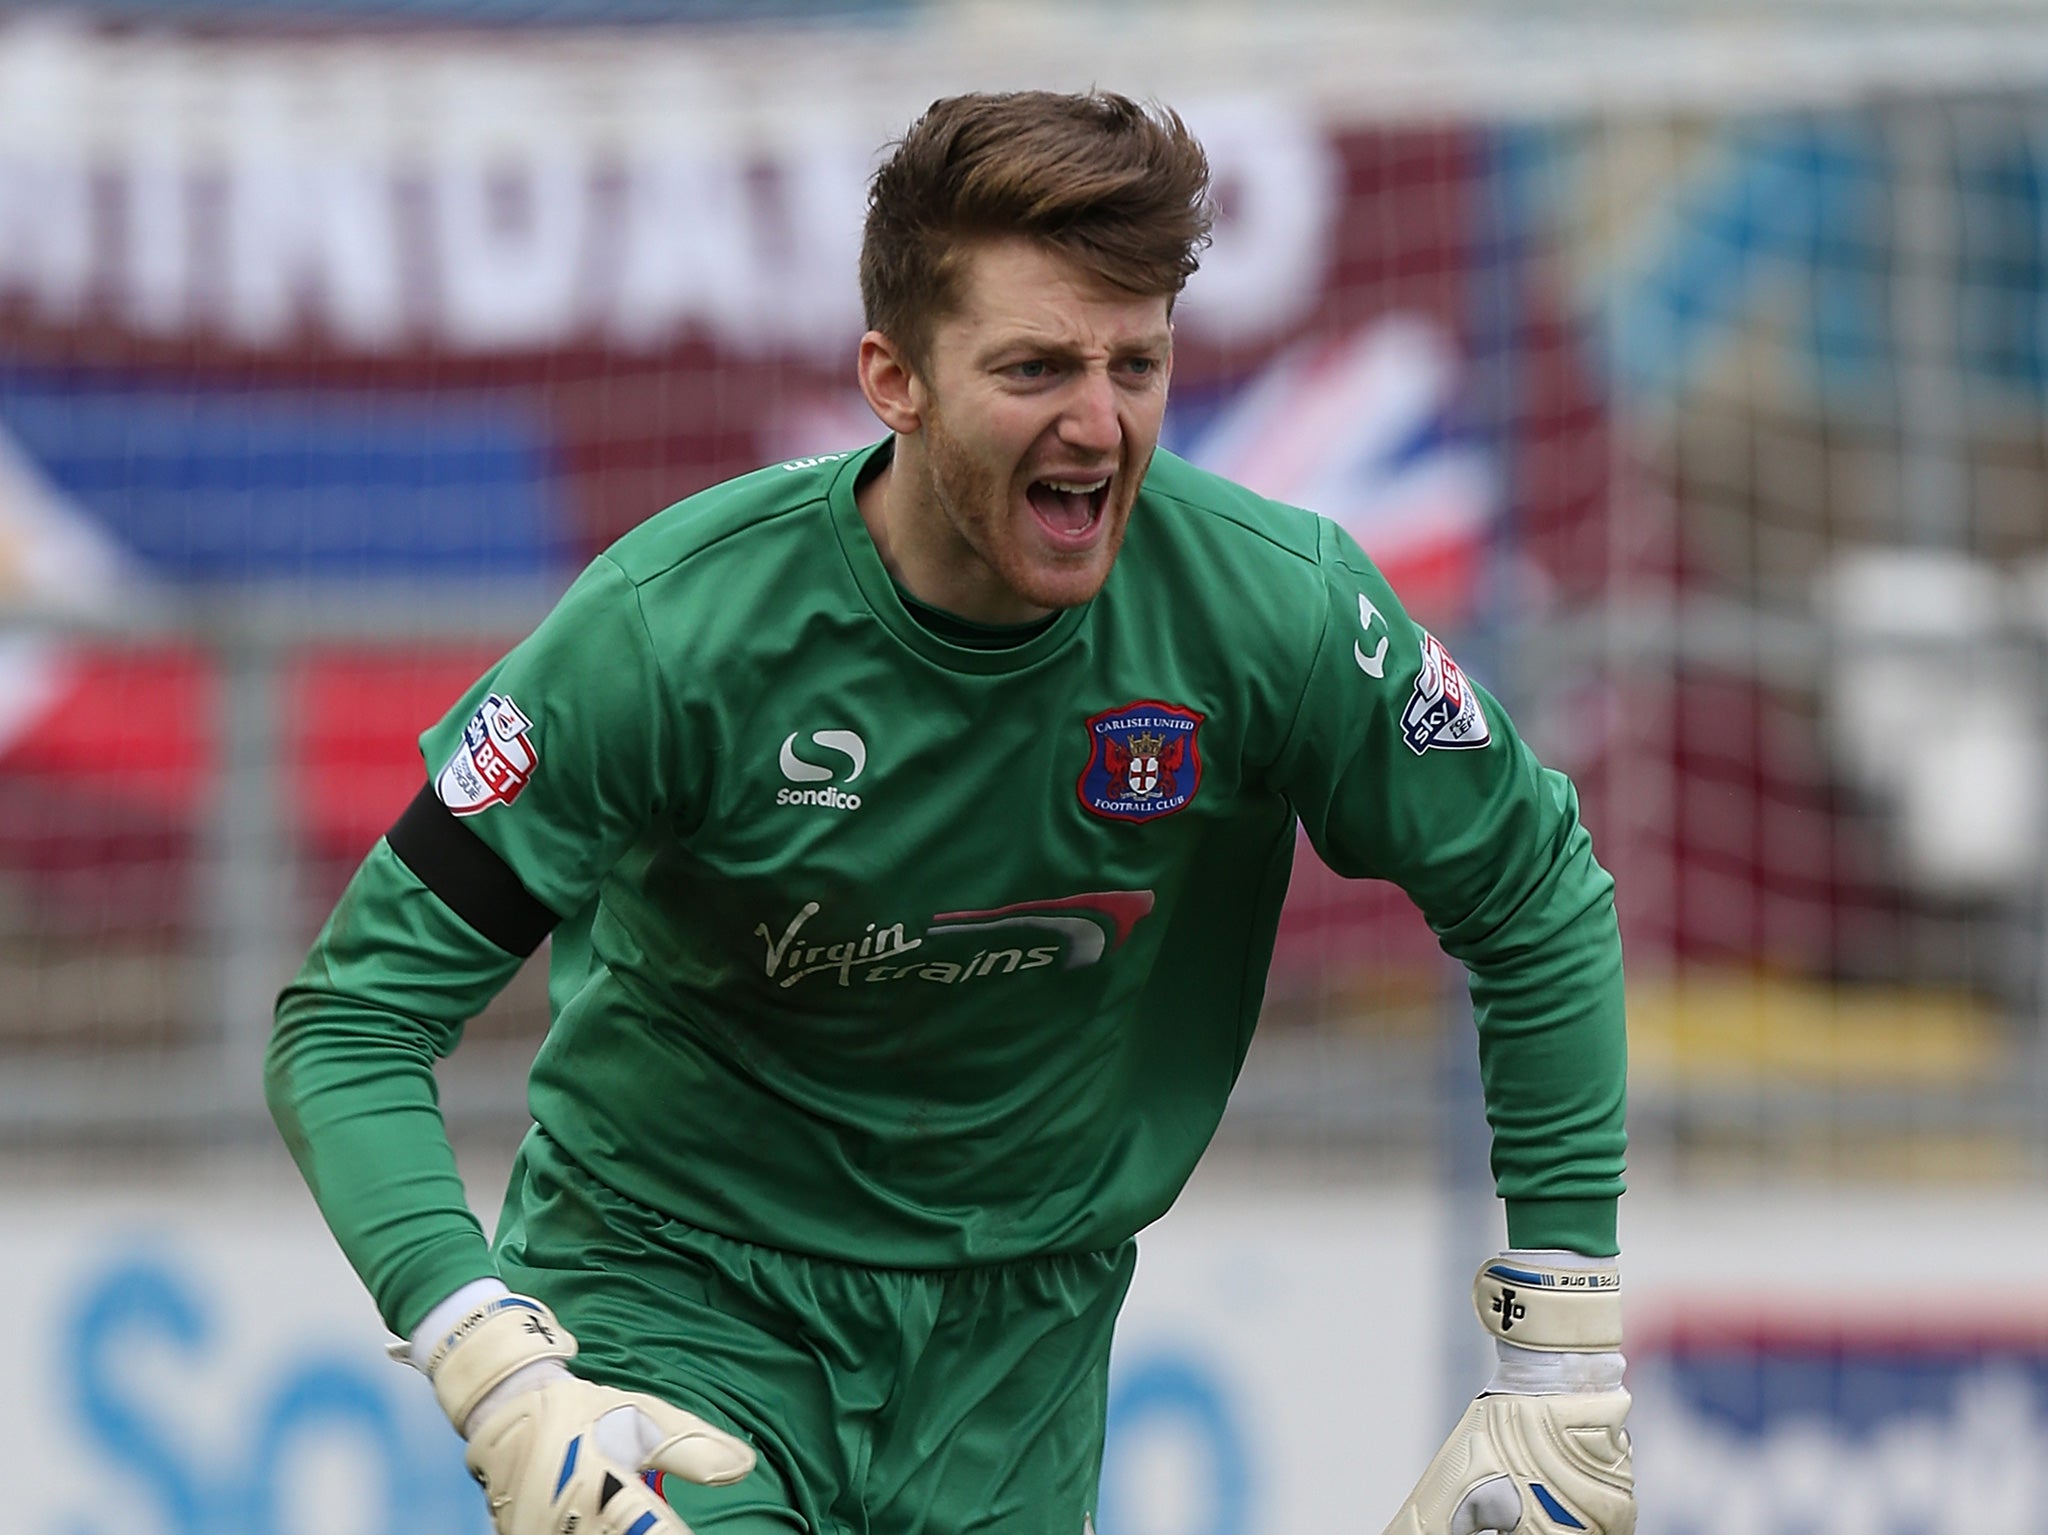 Gillespie is one of the most impressive young goalkeepers in the lower leagues